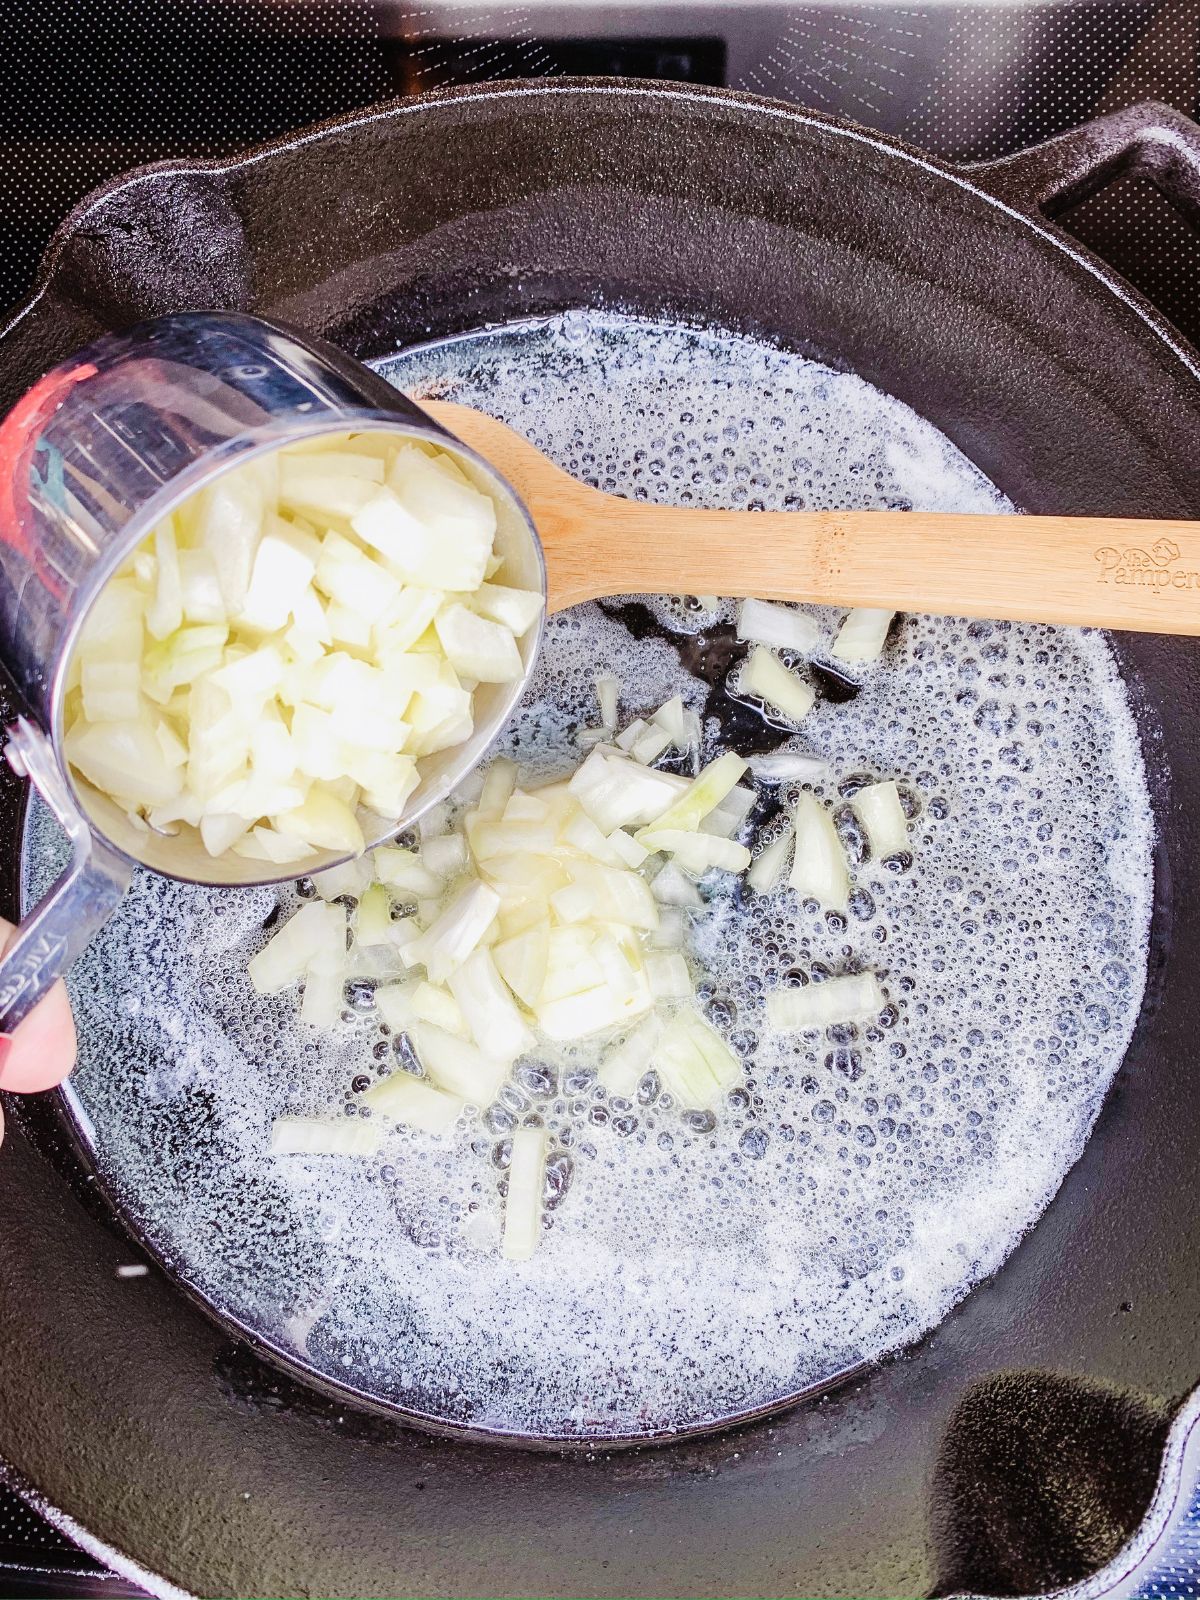 Cook chopped onions in butter in cast iron skillet.